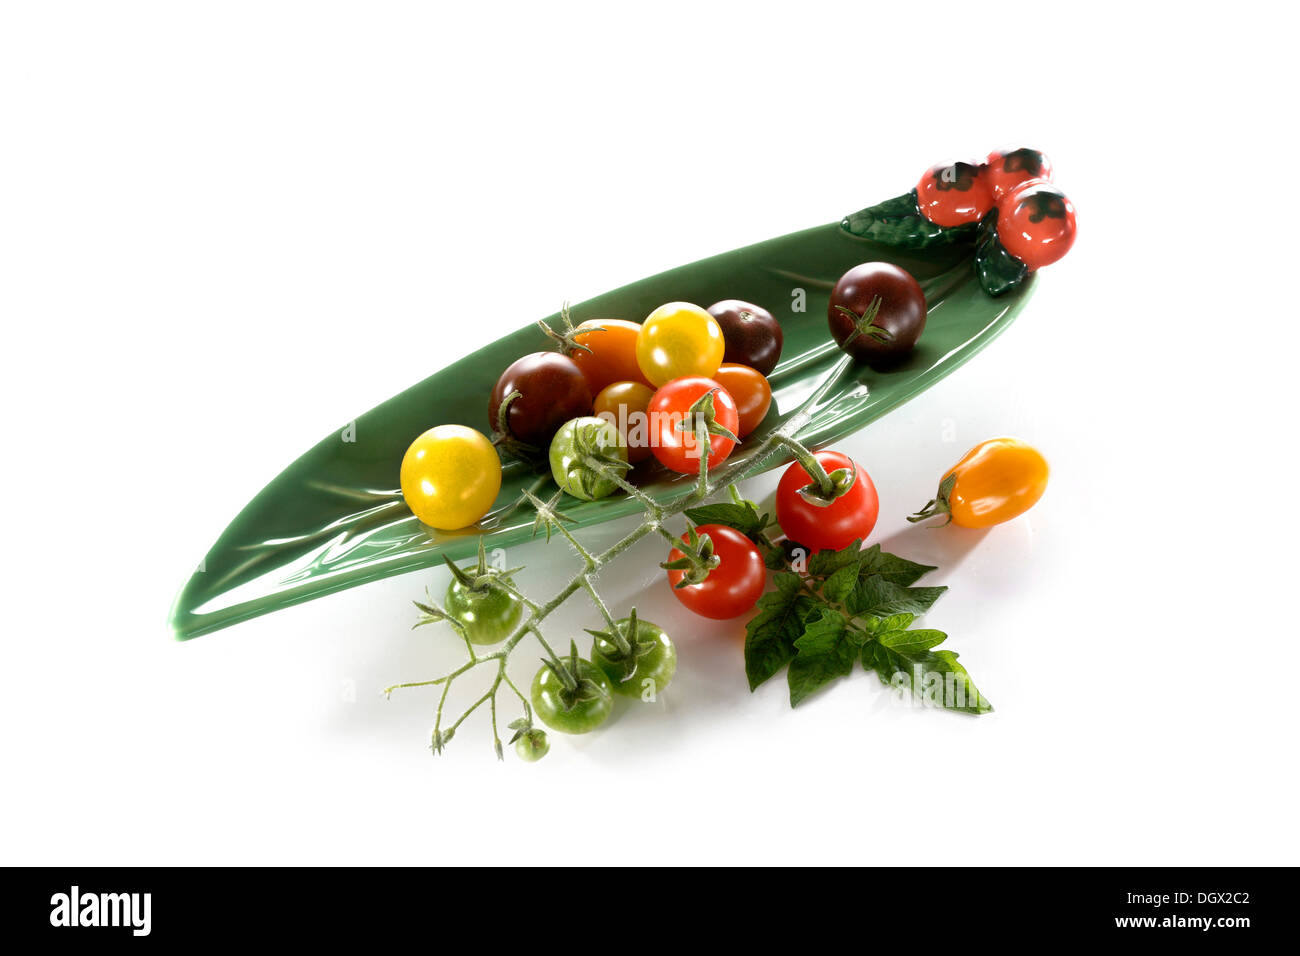 Wild tomatoes in an elongated leaf-shaped bowl Stock Photo